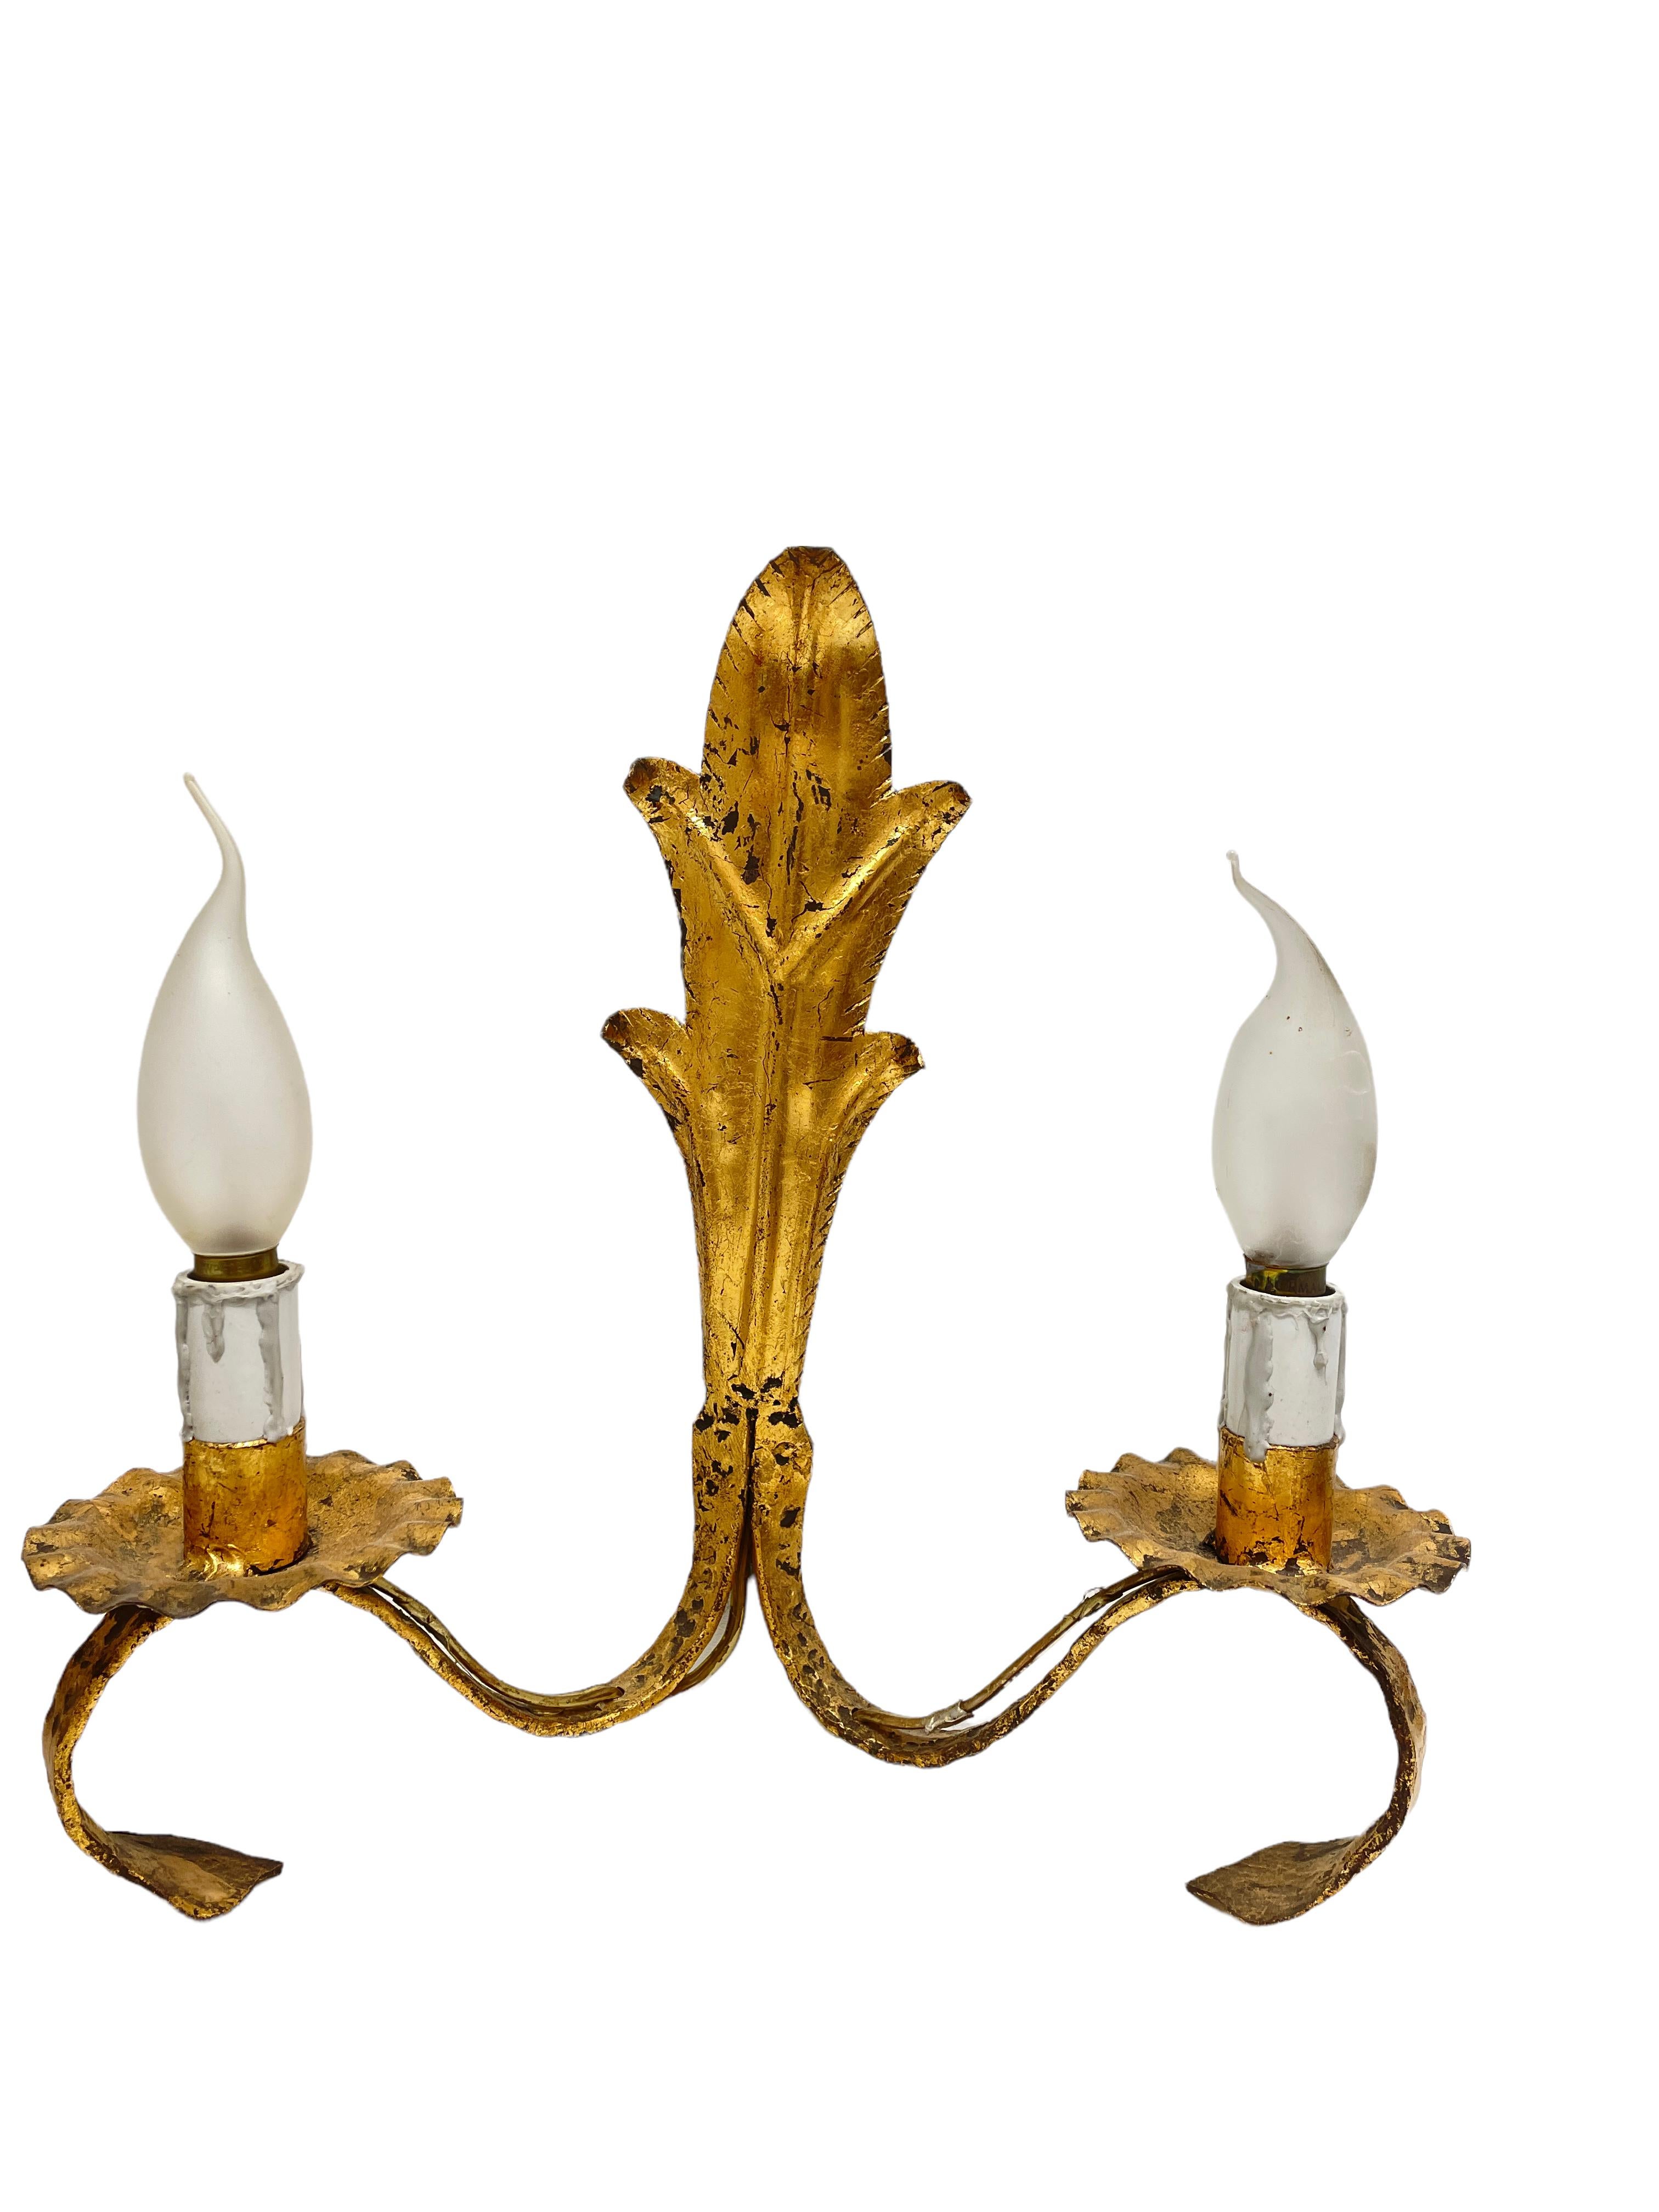 A pair Hollywood Regency midcentury gilt floral tole sconces, each Fixture requires two European E14 / 110 Volt Candelabra bulbs, each bulb up to 40 watts. The wall lights have a beautiful patina and give each room an eclectic statement. Lightbulbs